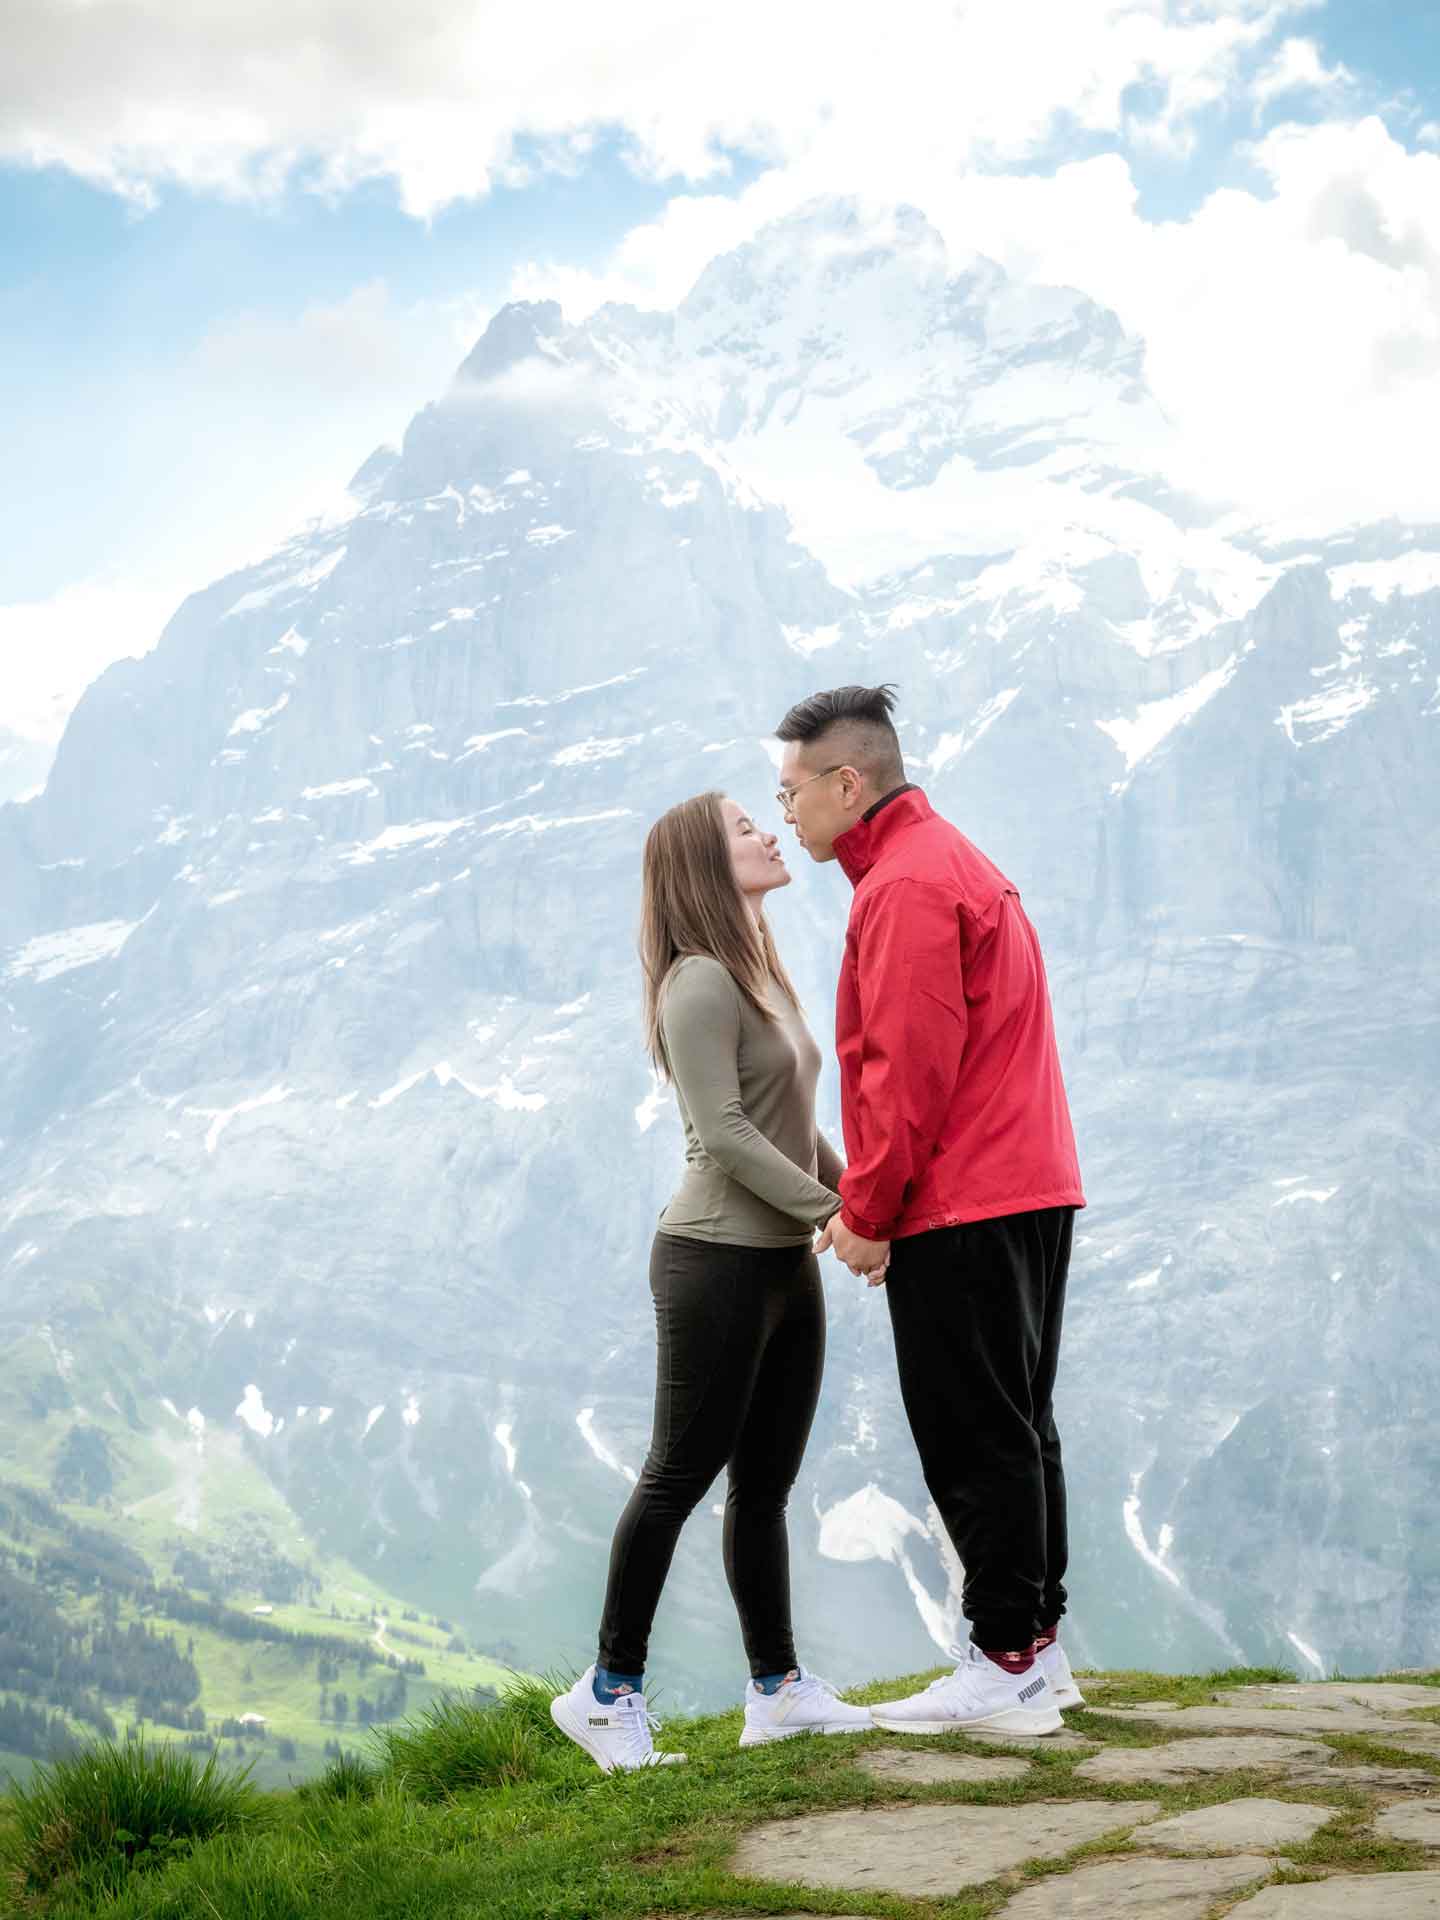 Couples photo shoot on Grindelwald First